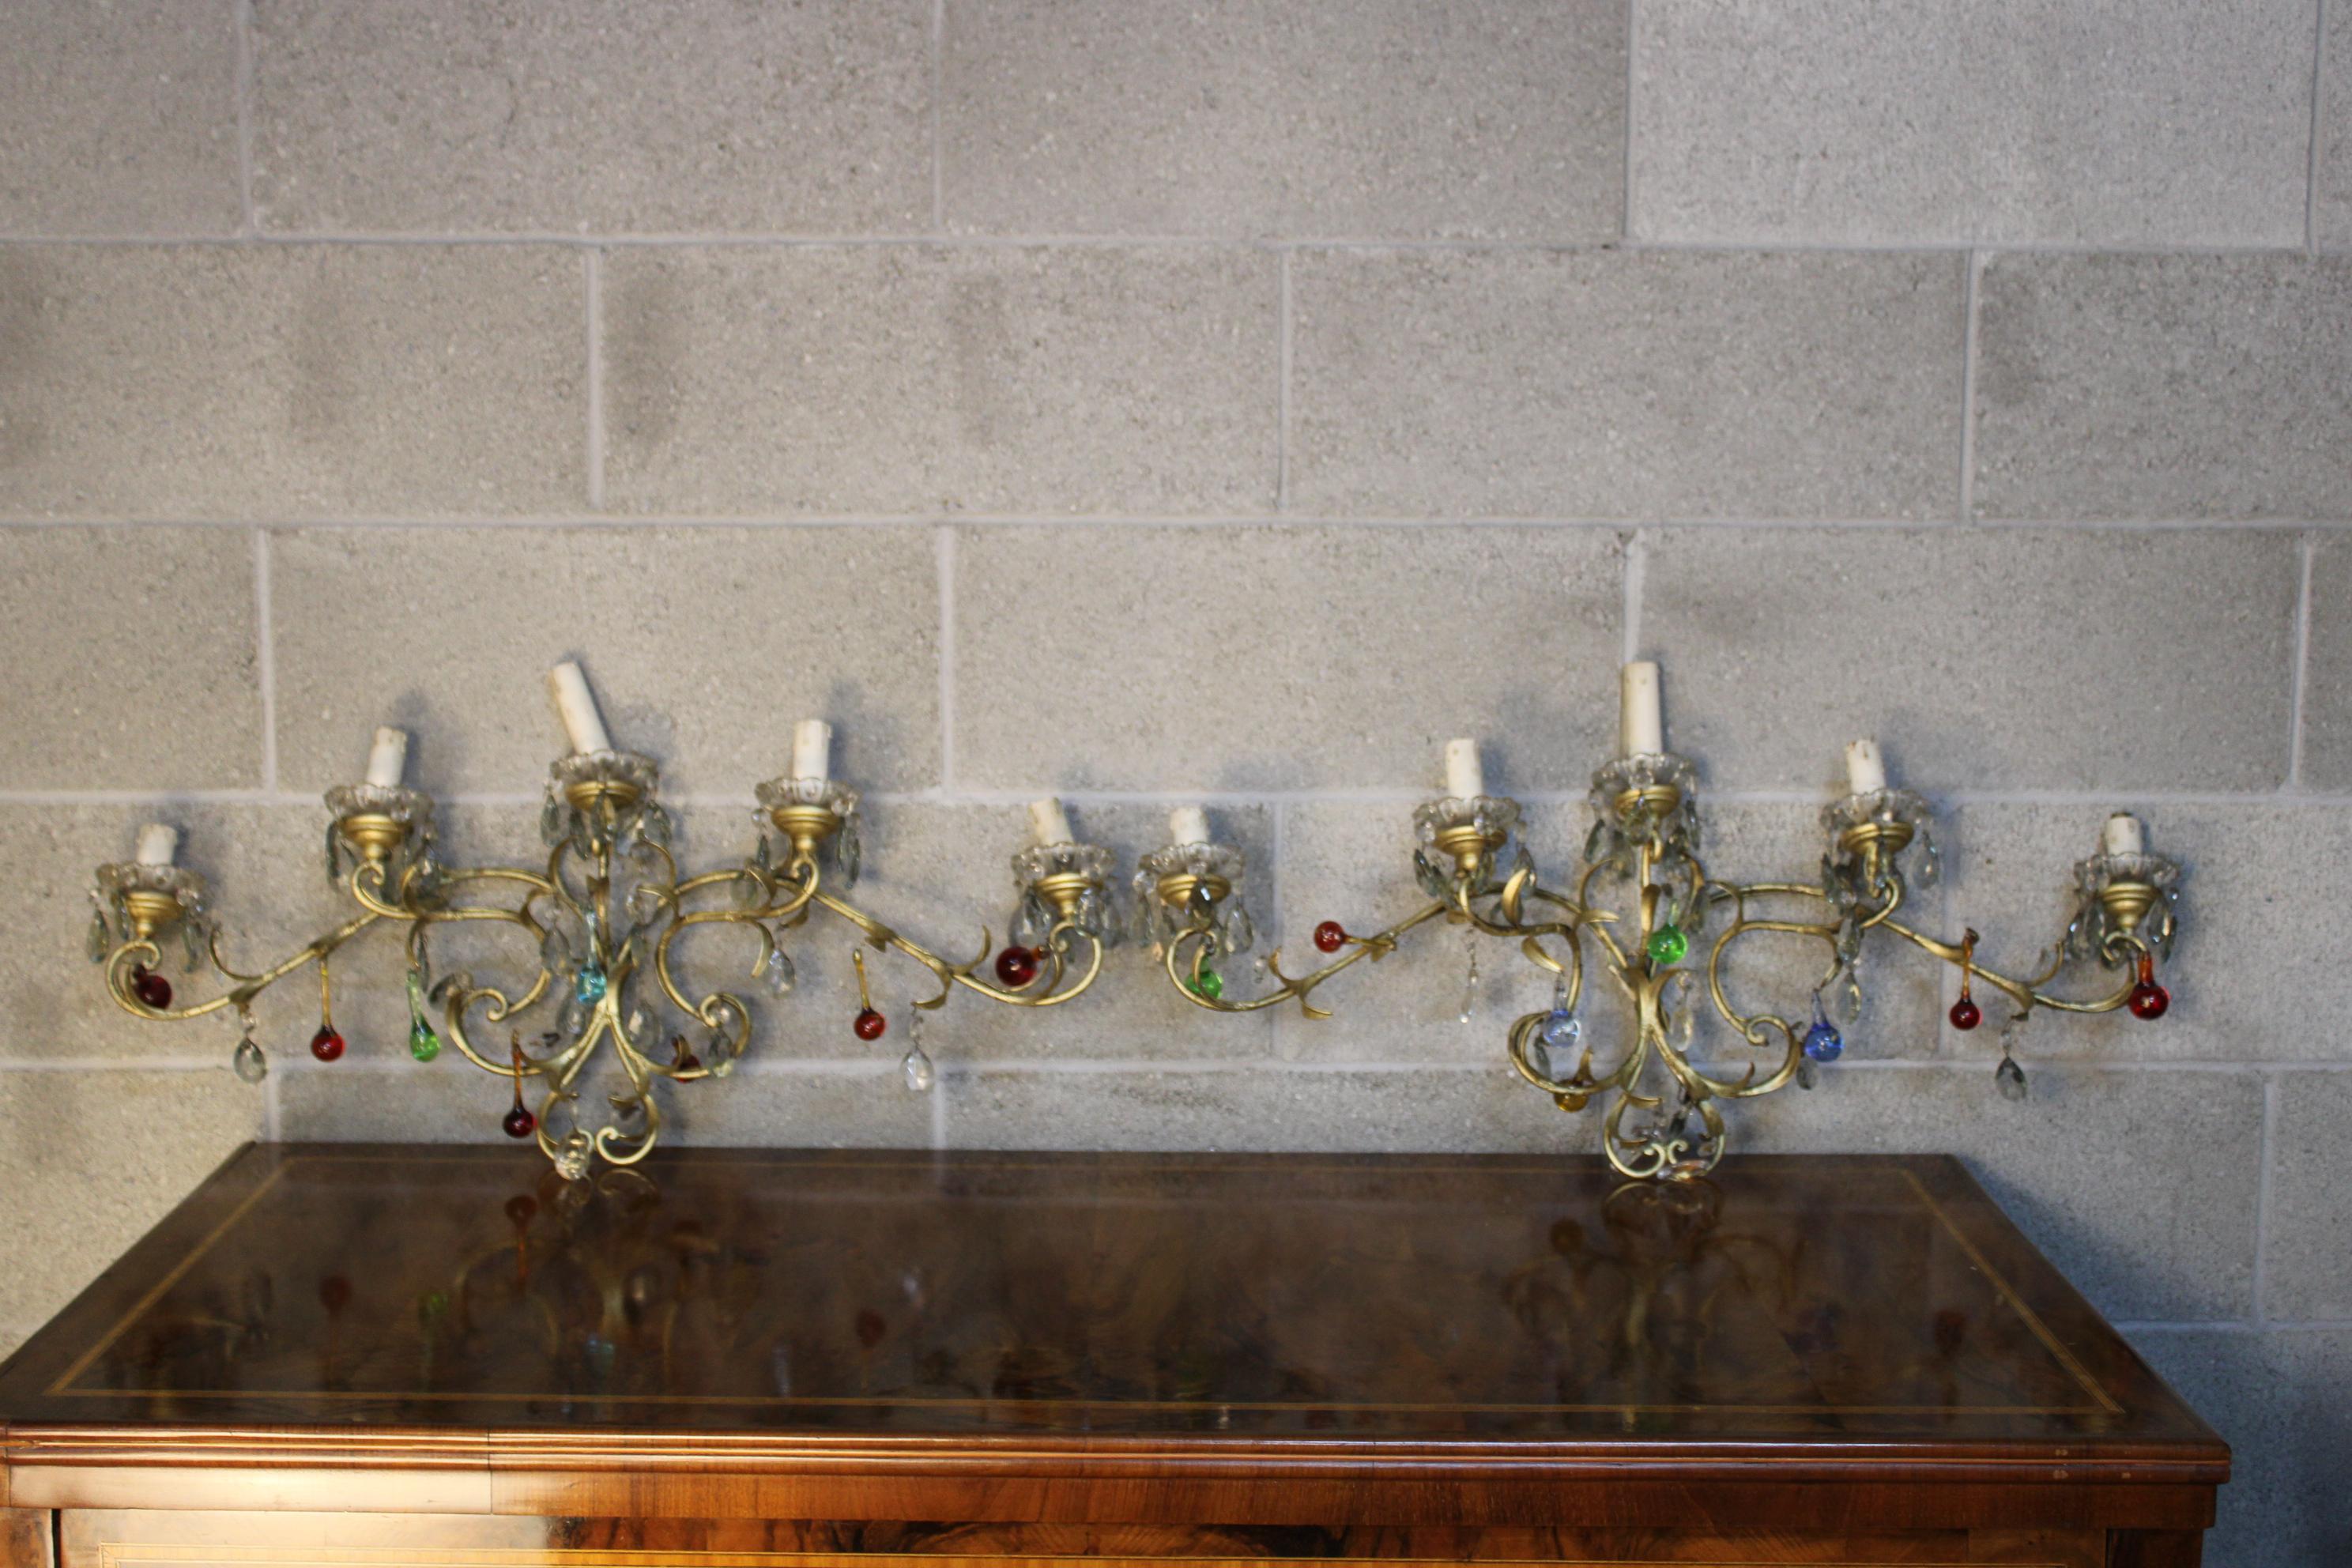 Pair of sconces, circa 1920, Italy.
Very old particular pieces.
Colorful murano glasses and gilt bronze.